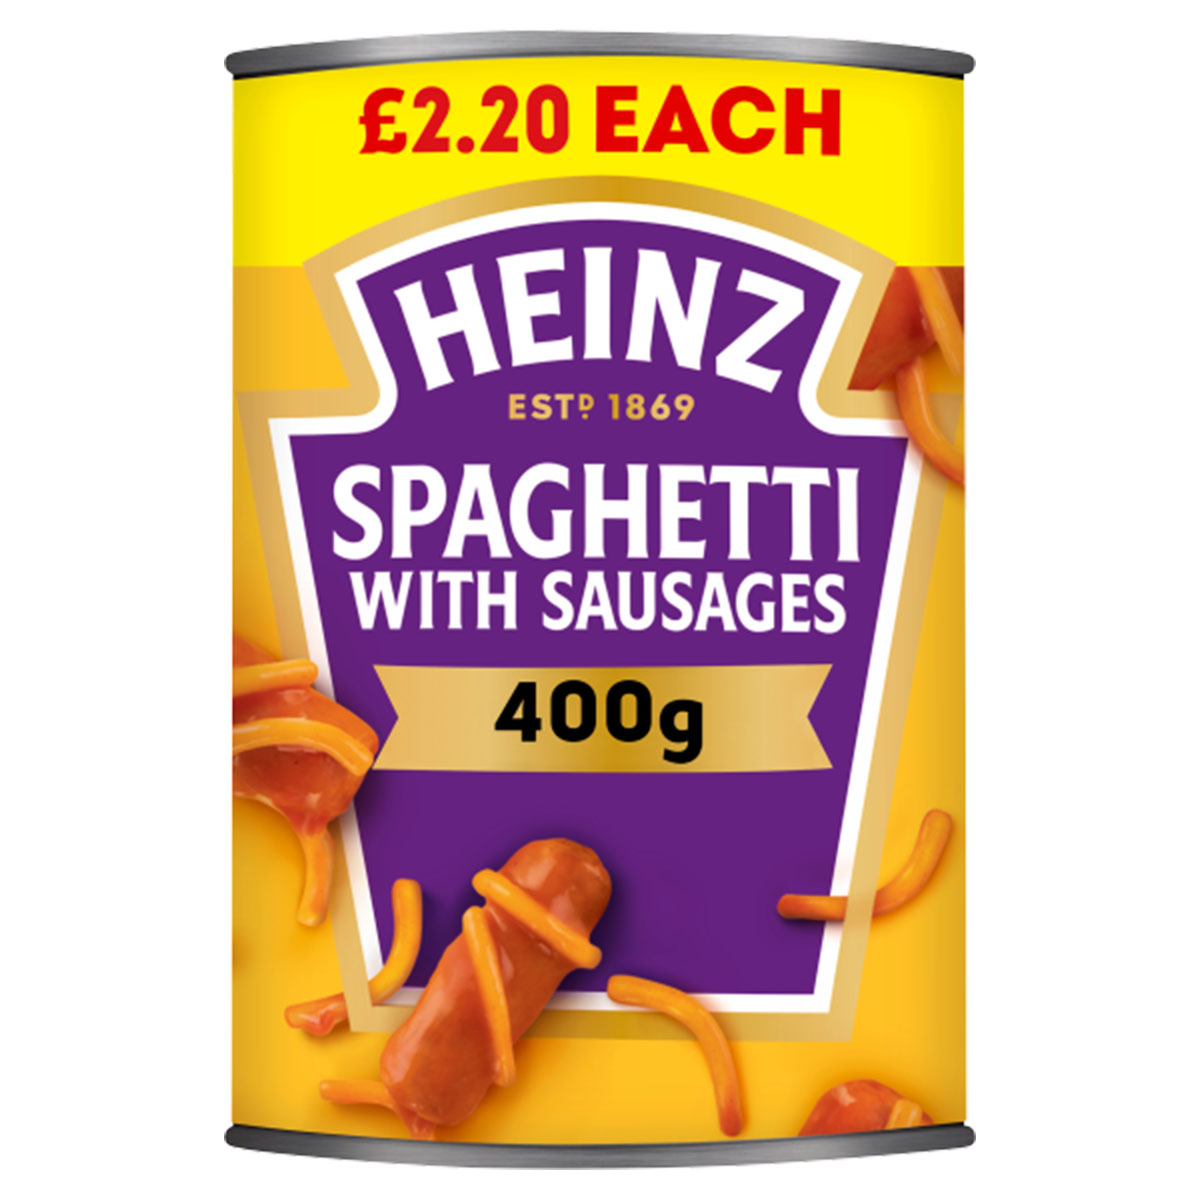 Sentence with Product Name: Can of Heinz - Spaghetti & Sausages - 400g, priced at £2.20.